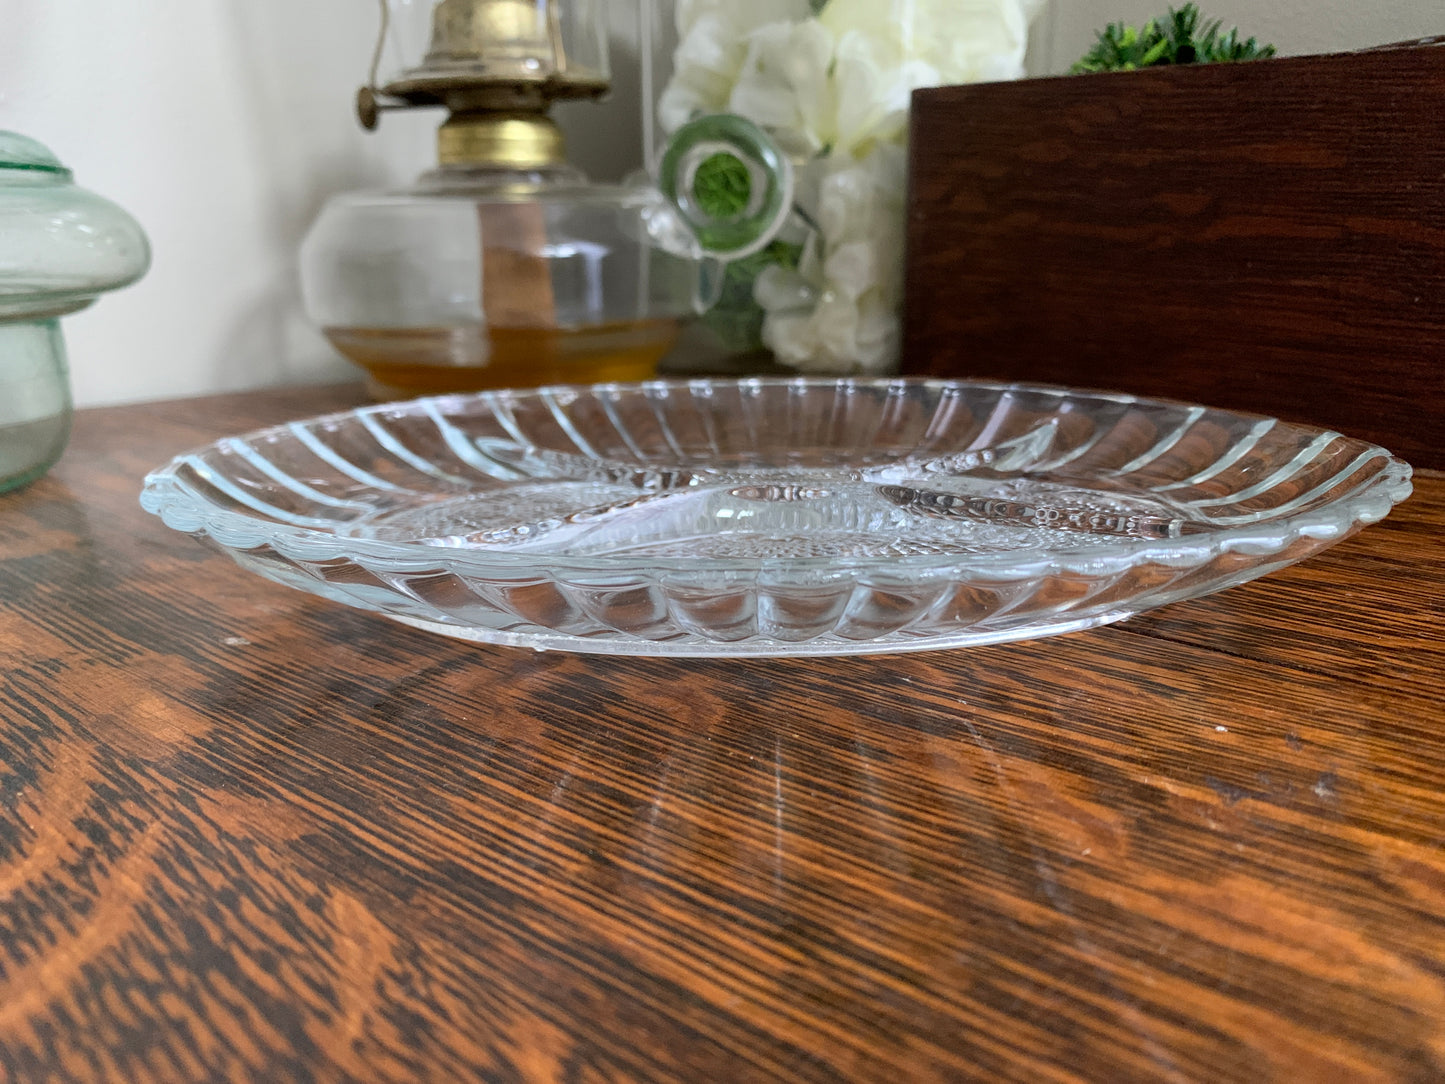 Sandwich Glass Divided Dish Relish Tray Vintage Serving Tiara Glass